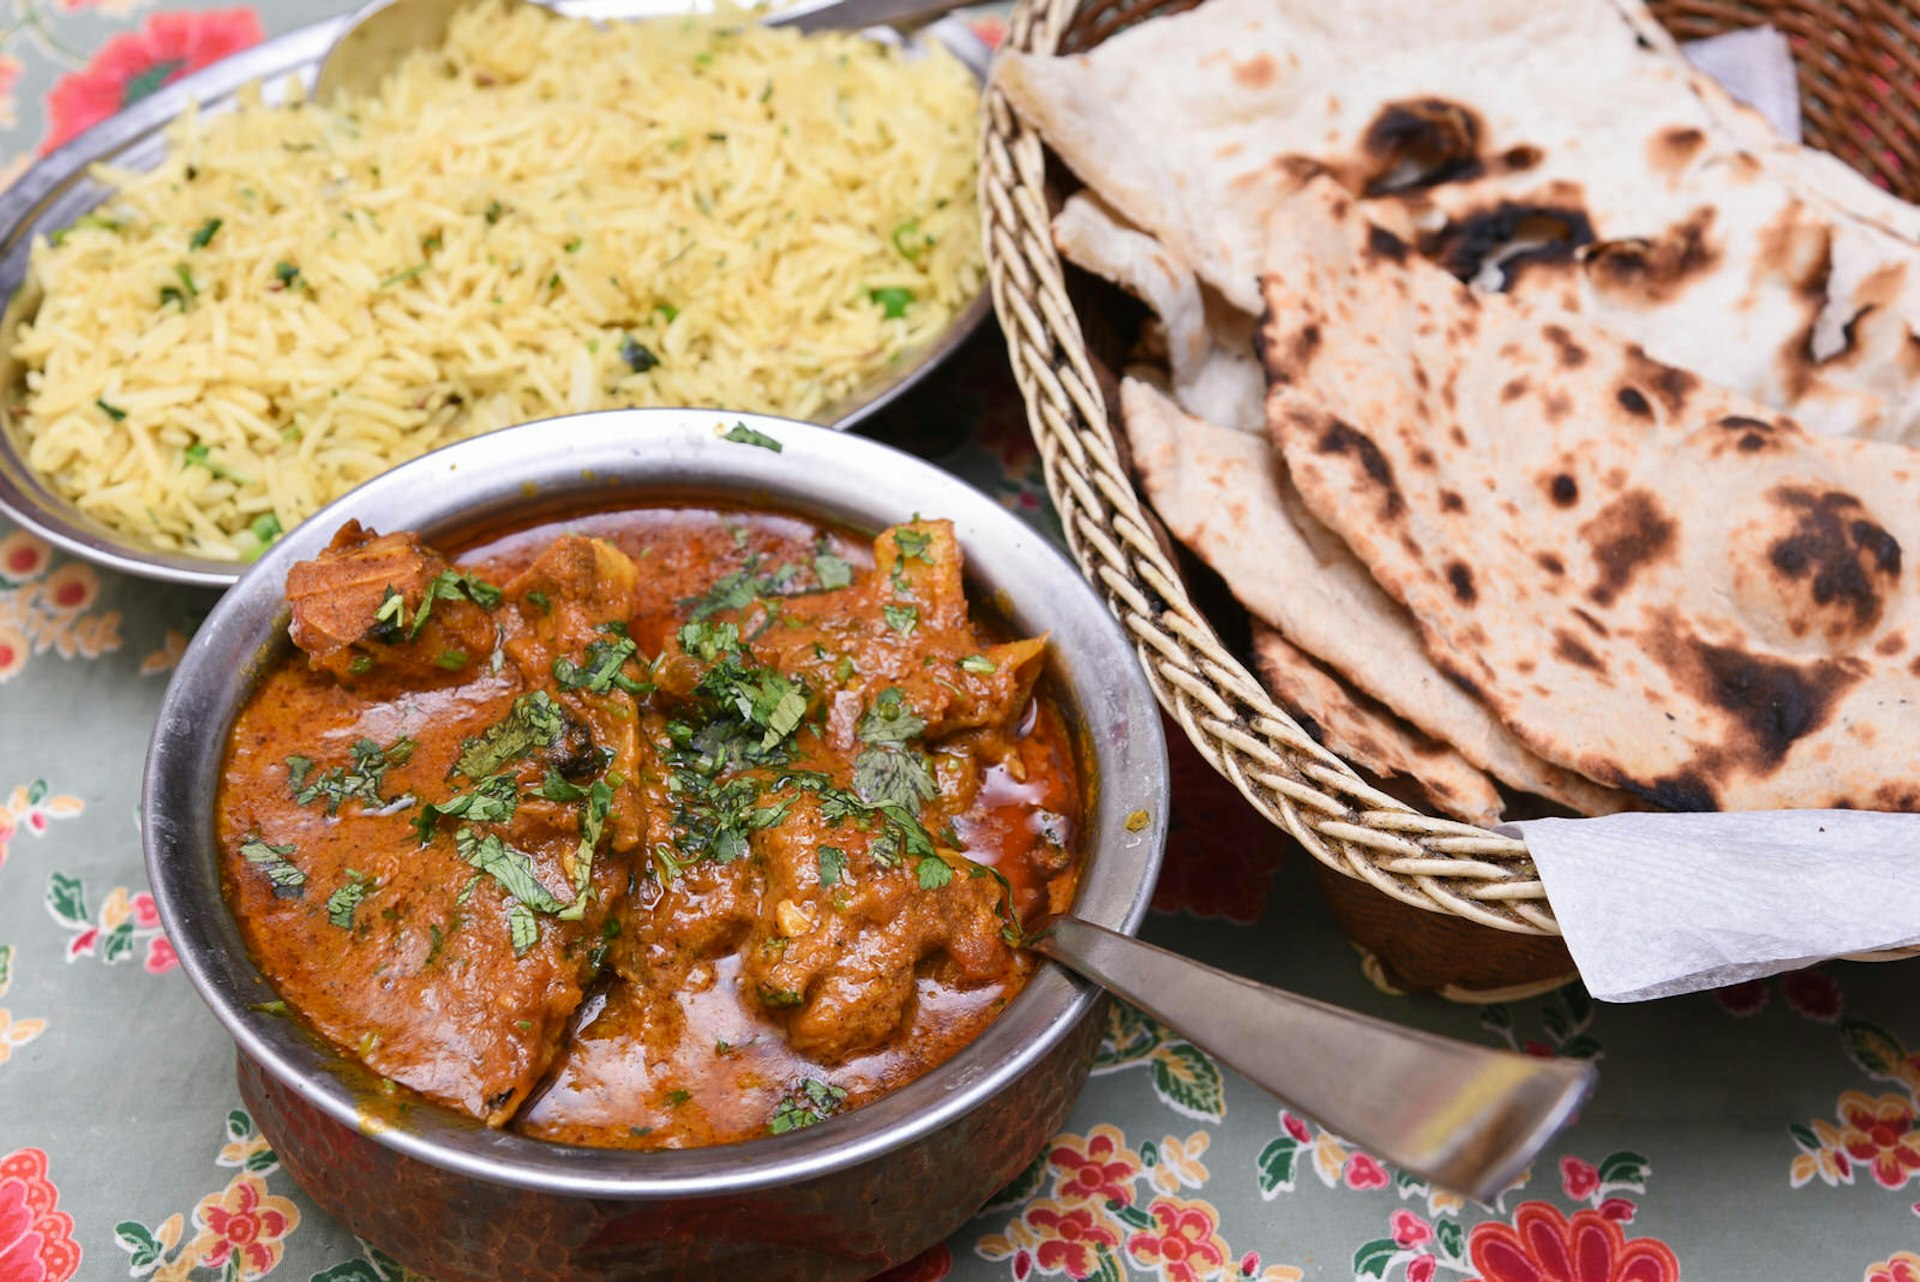 A bowl of butter chicken garnished with rice and a roti